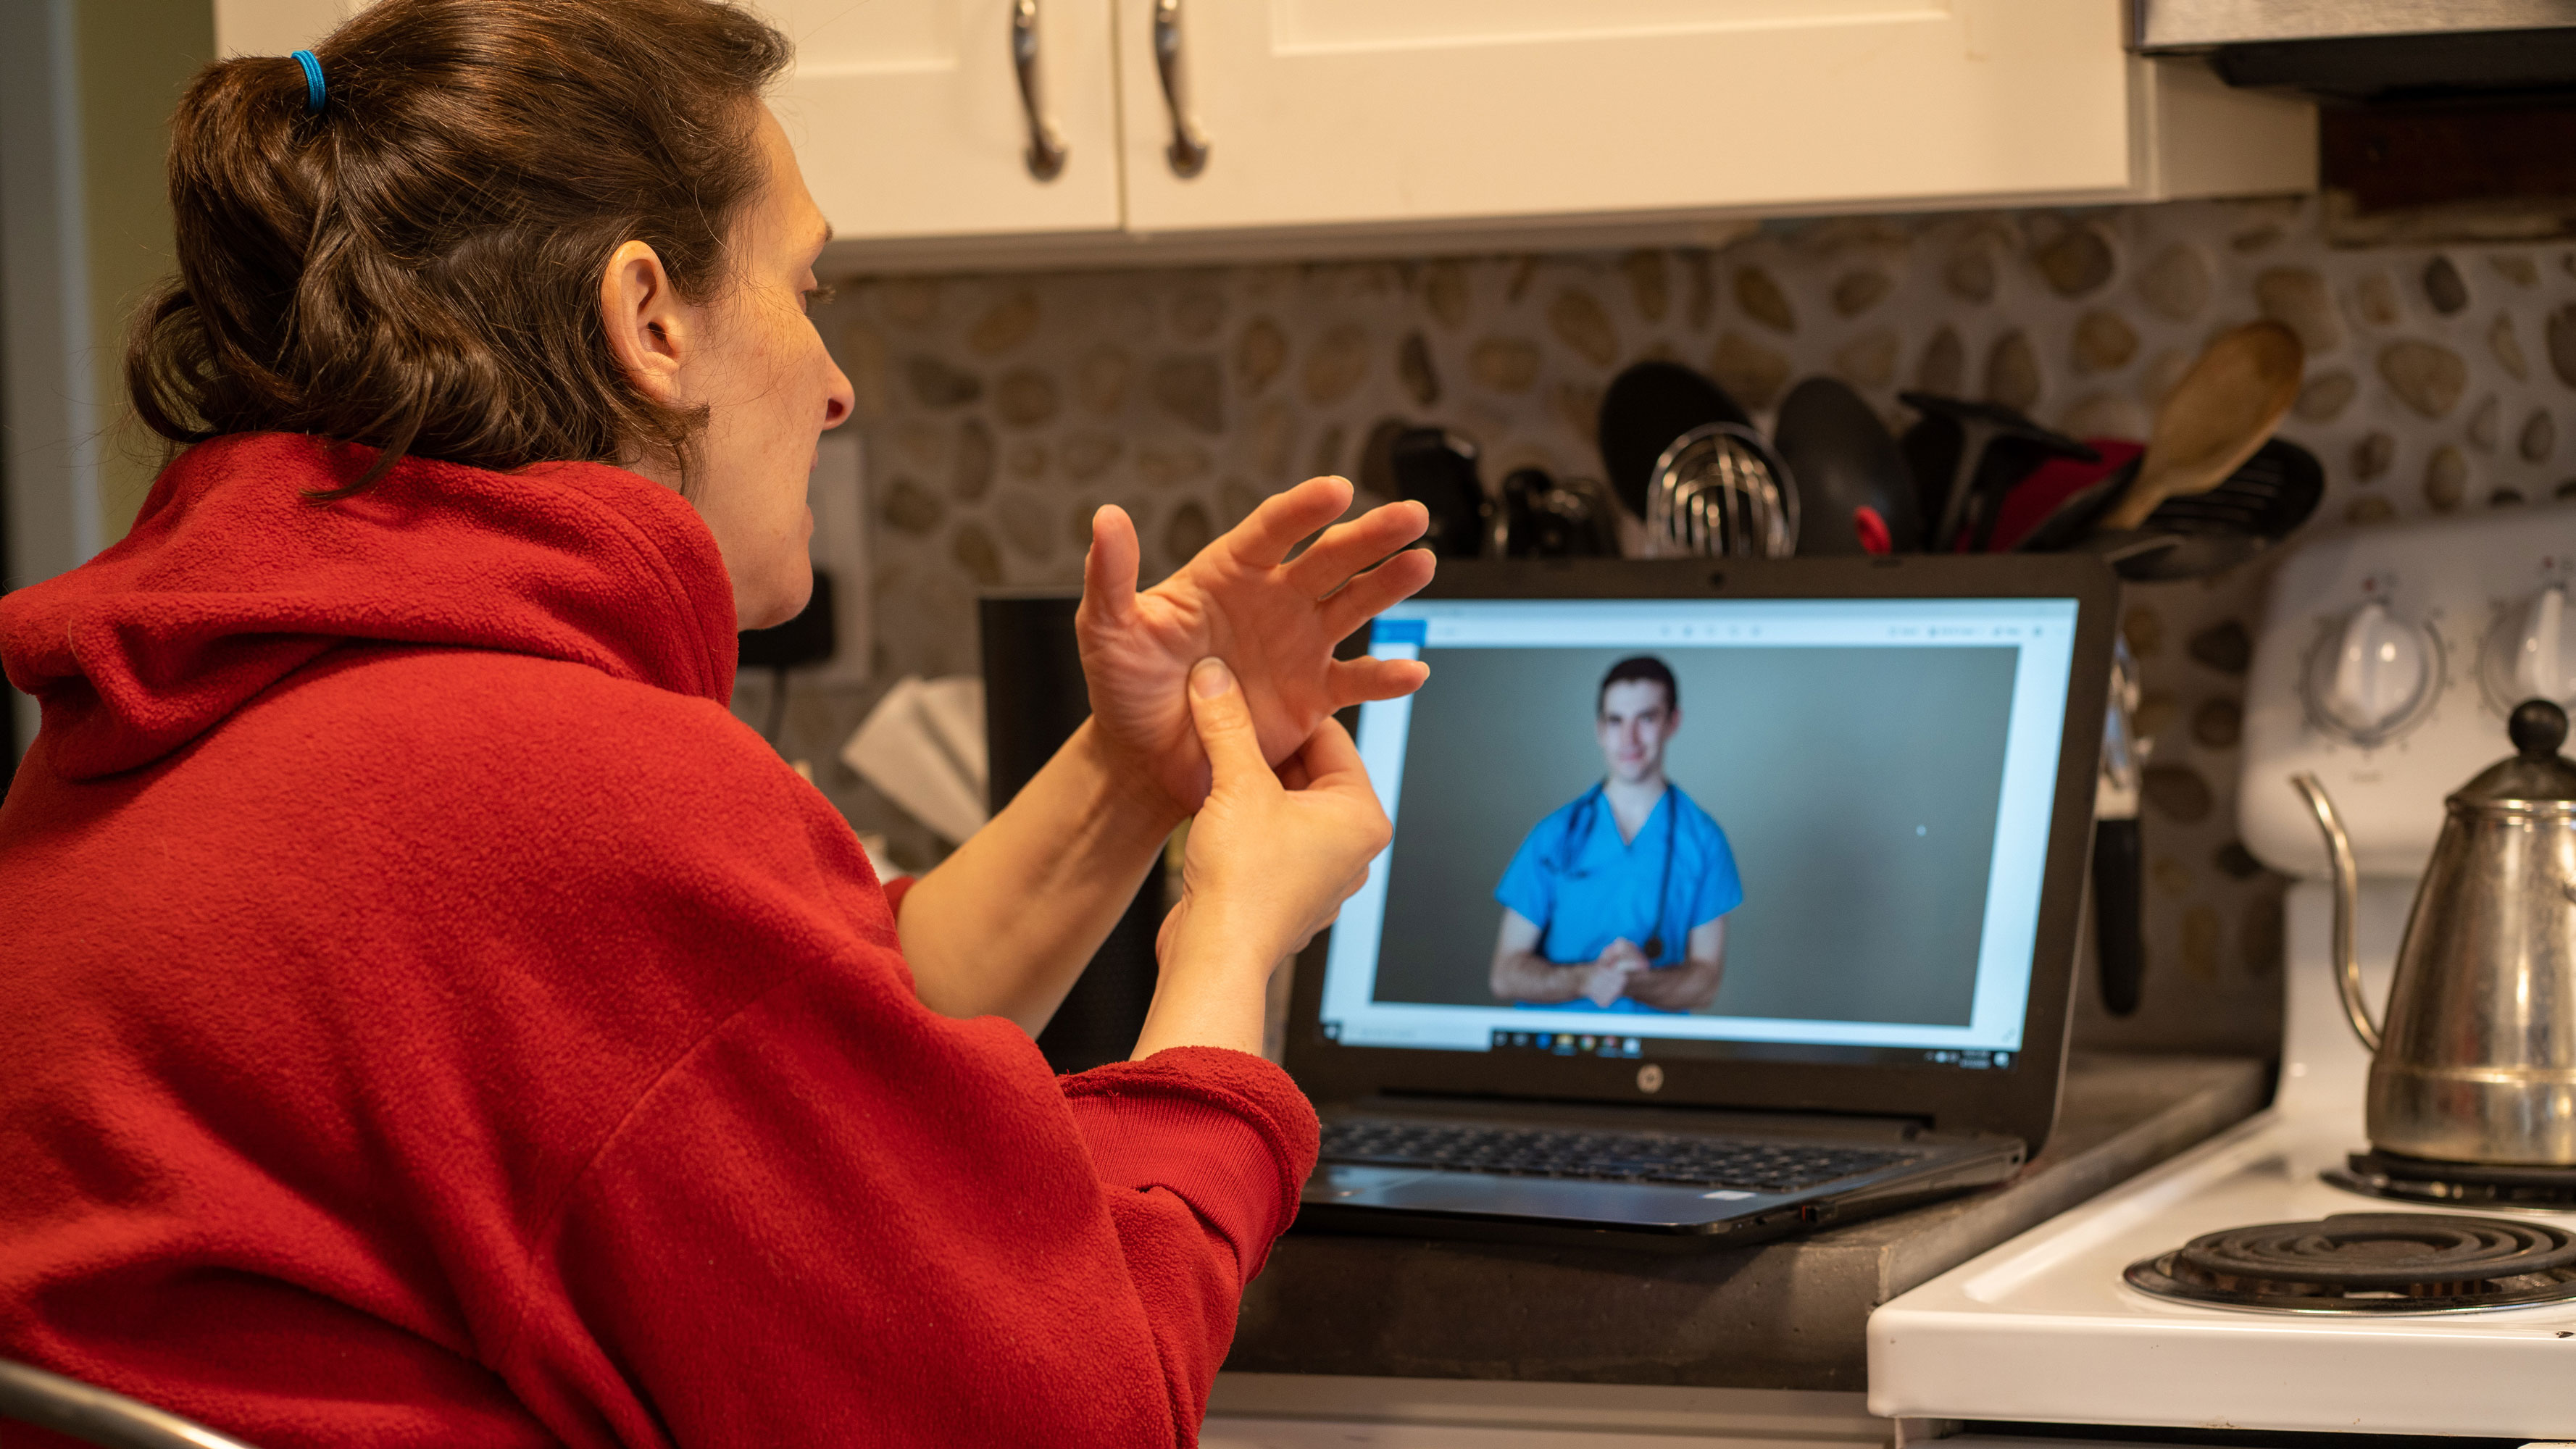 Online Telehealth visit with a woman who hurt her hand in the kitchen.